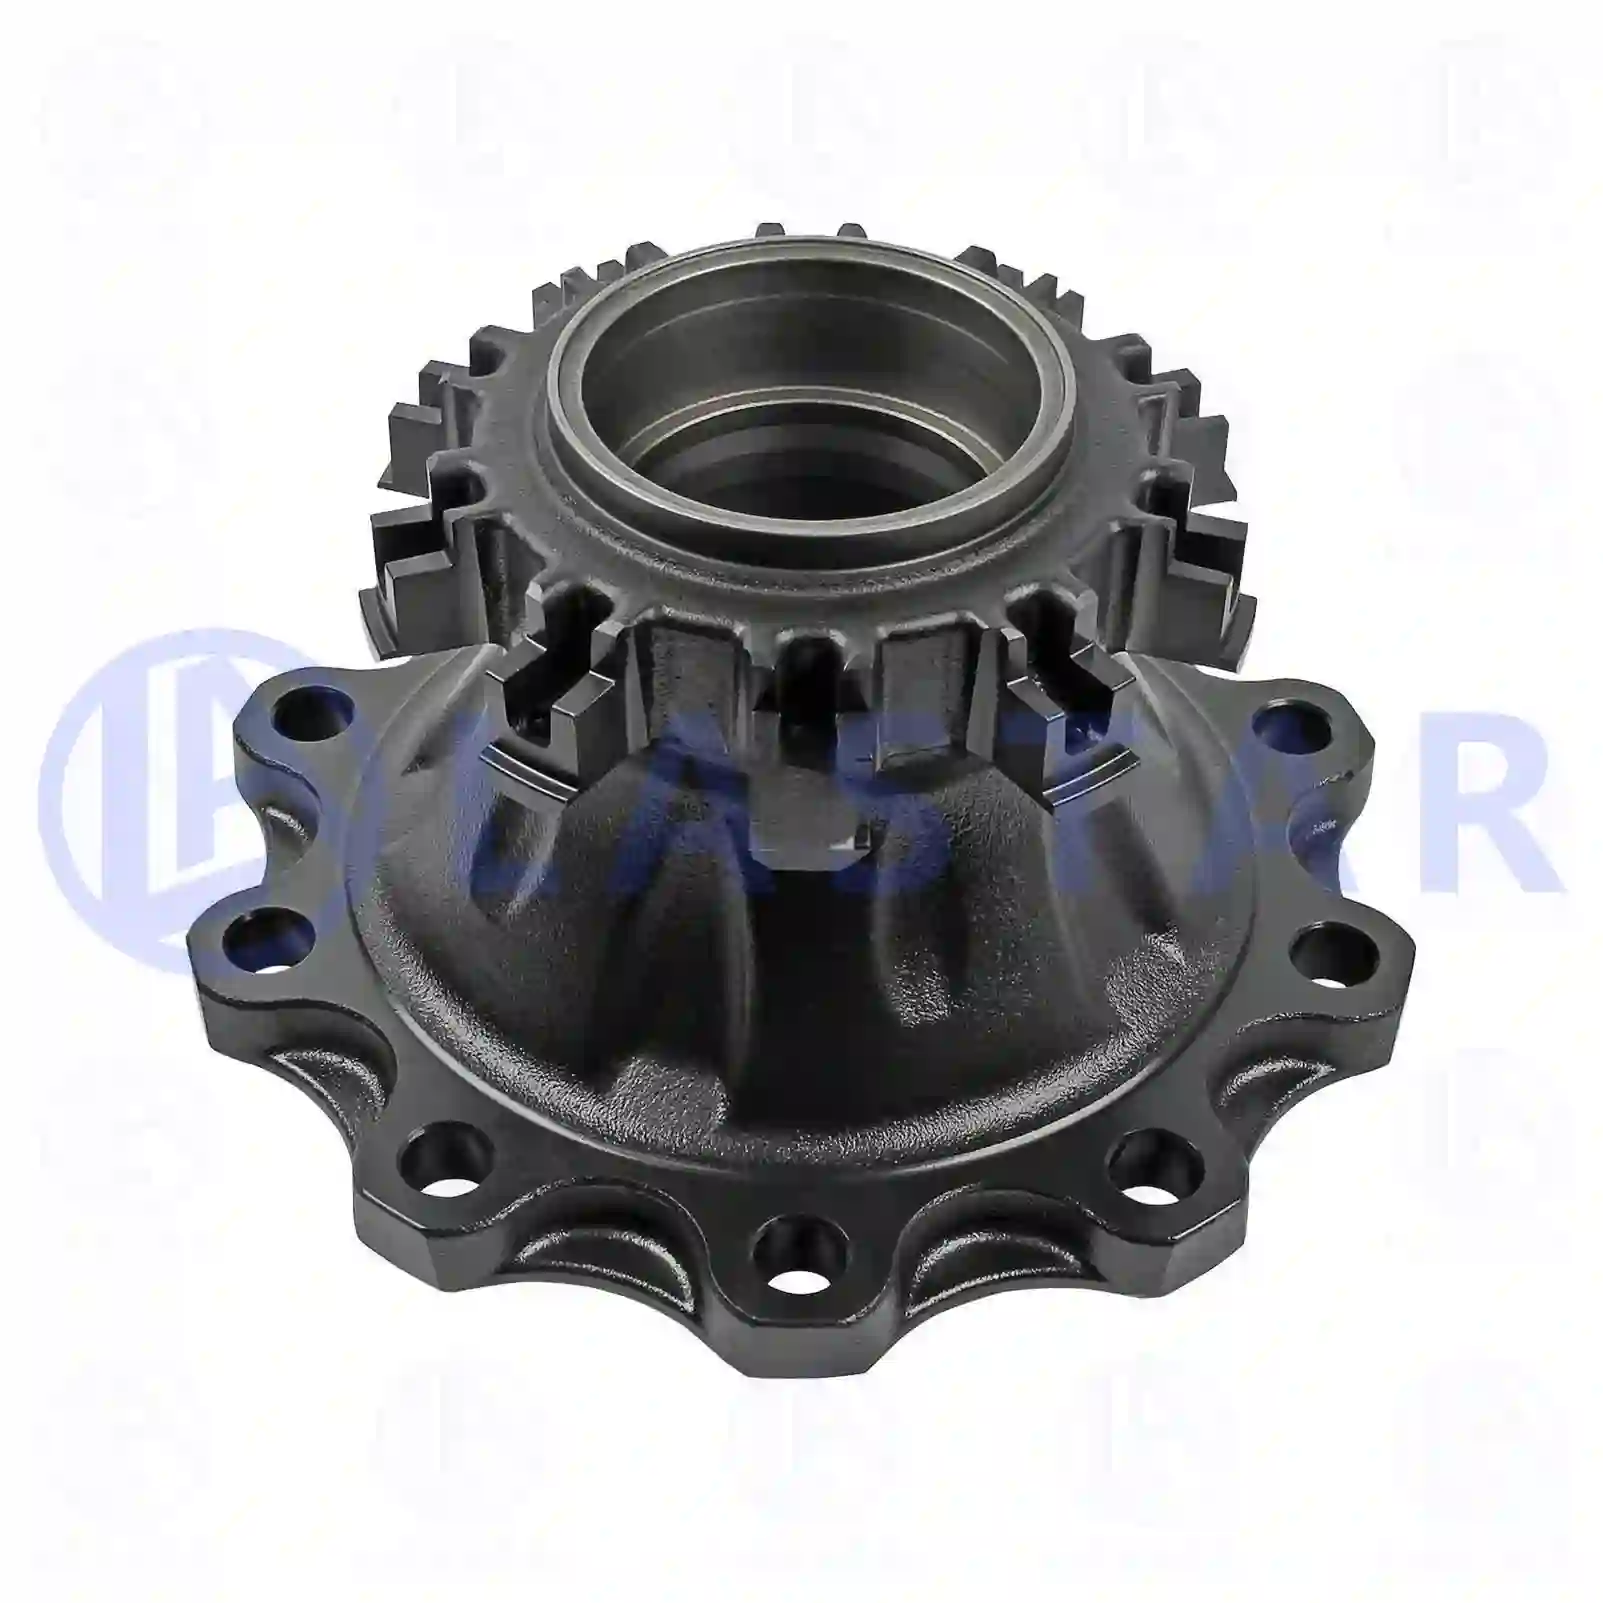 Wheel hub, without bearings, 77726486, 1391615S, 1697346S, , , , , ||  77726486 Lastar Spare Part | Truck Spare Parts, Auotomotive Spare Parts Wheel hub, without bearings, 77726486, 1391615S, 1697346S, , , , , ||  77726486 Lastar Spare Part | Truck Spare Parts, Auotomotive Spare Parts